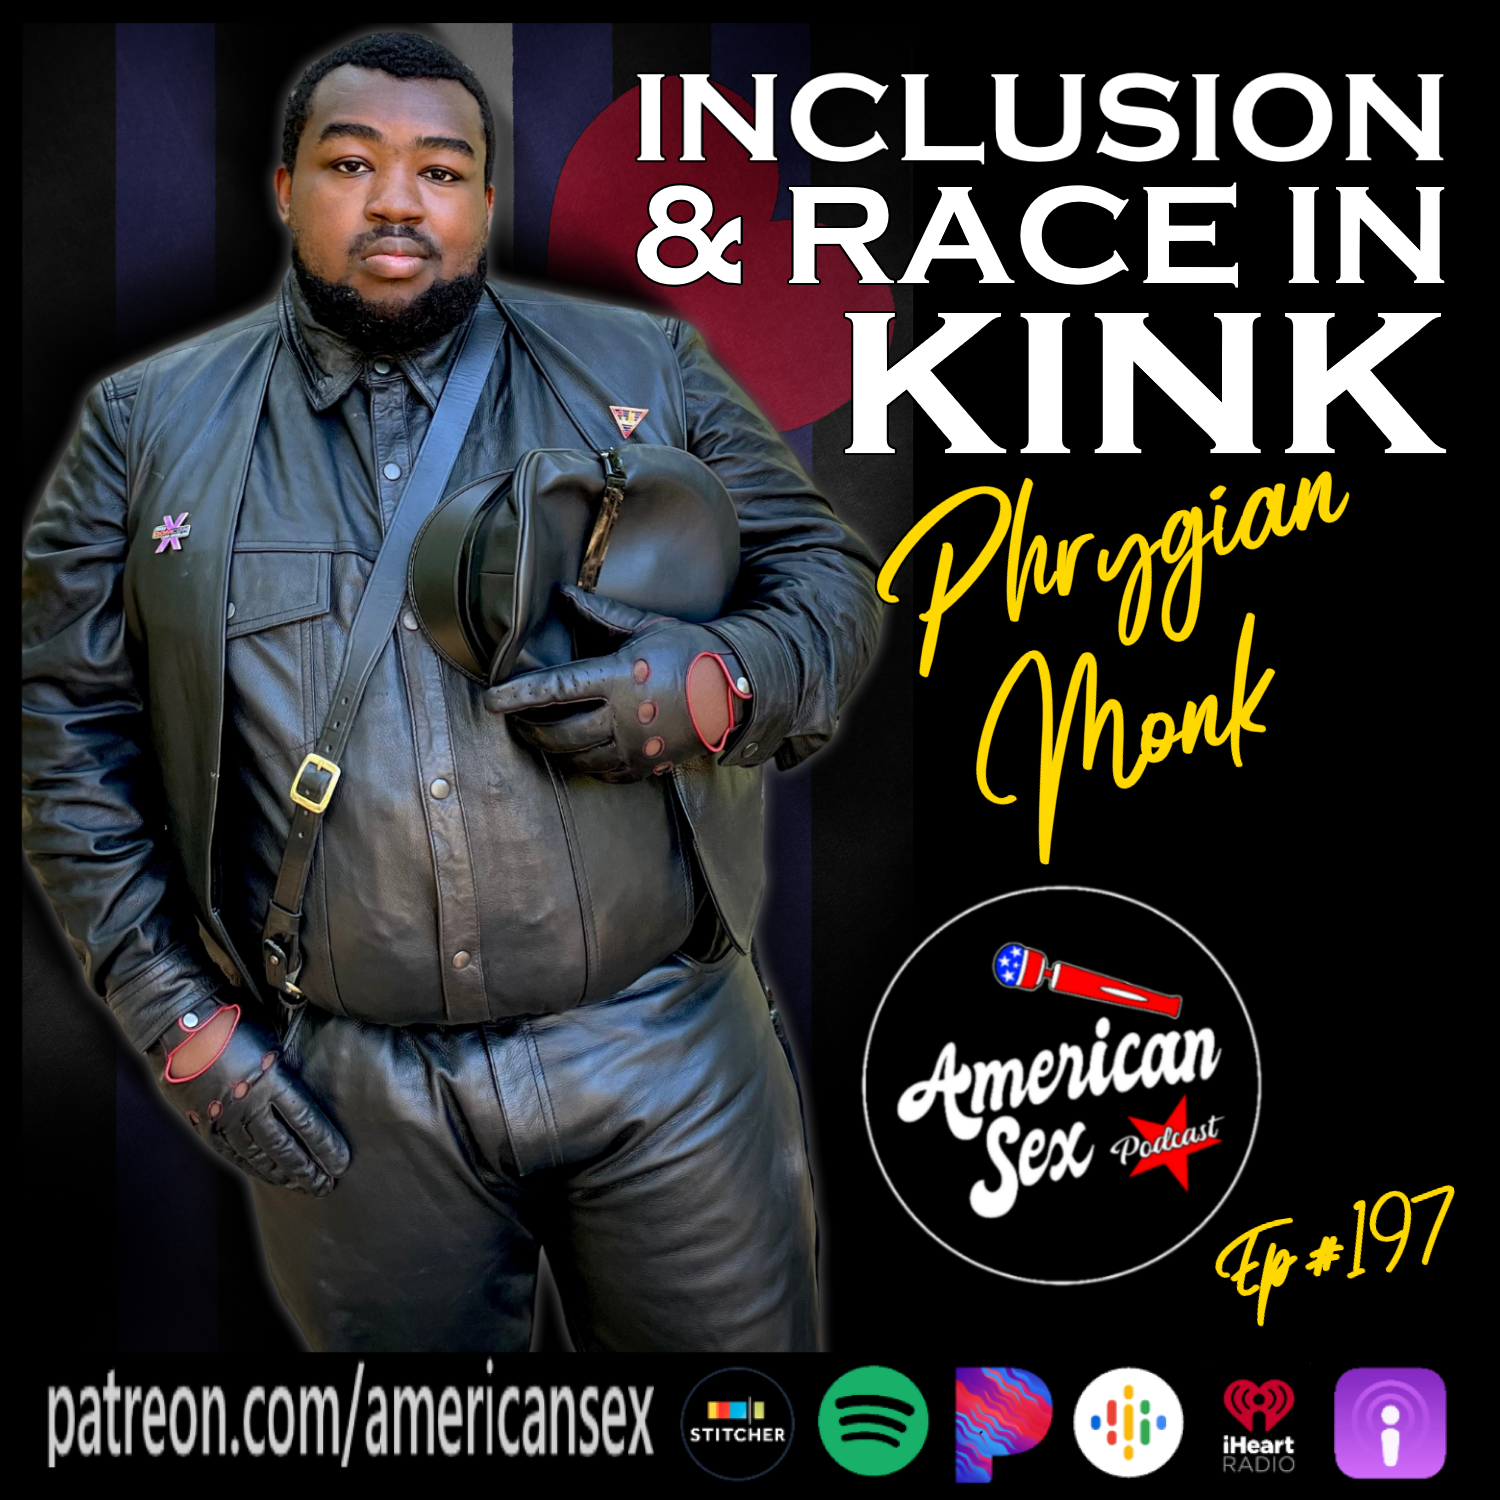 Inclusion & Race In Kink with Phrygian Monk - Ep 197 American Sex Podcast episode art